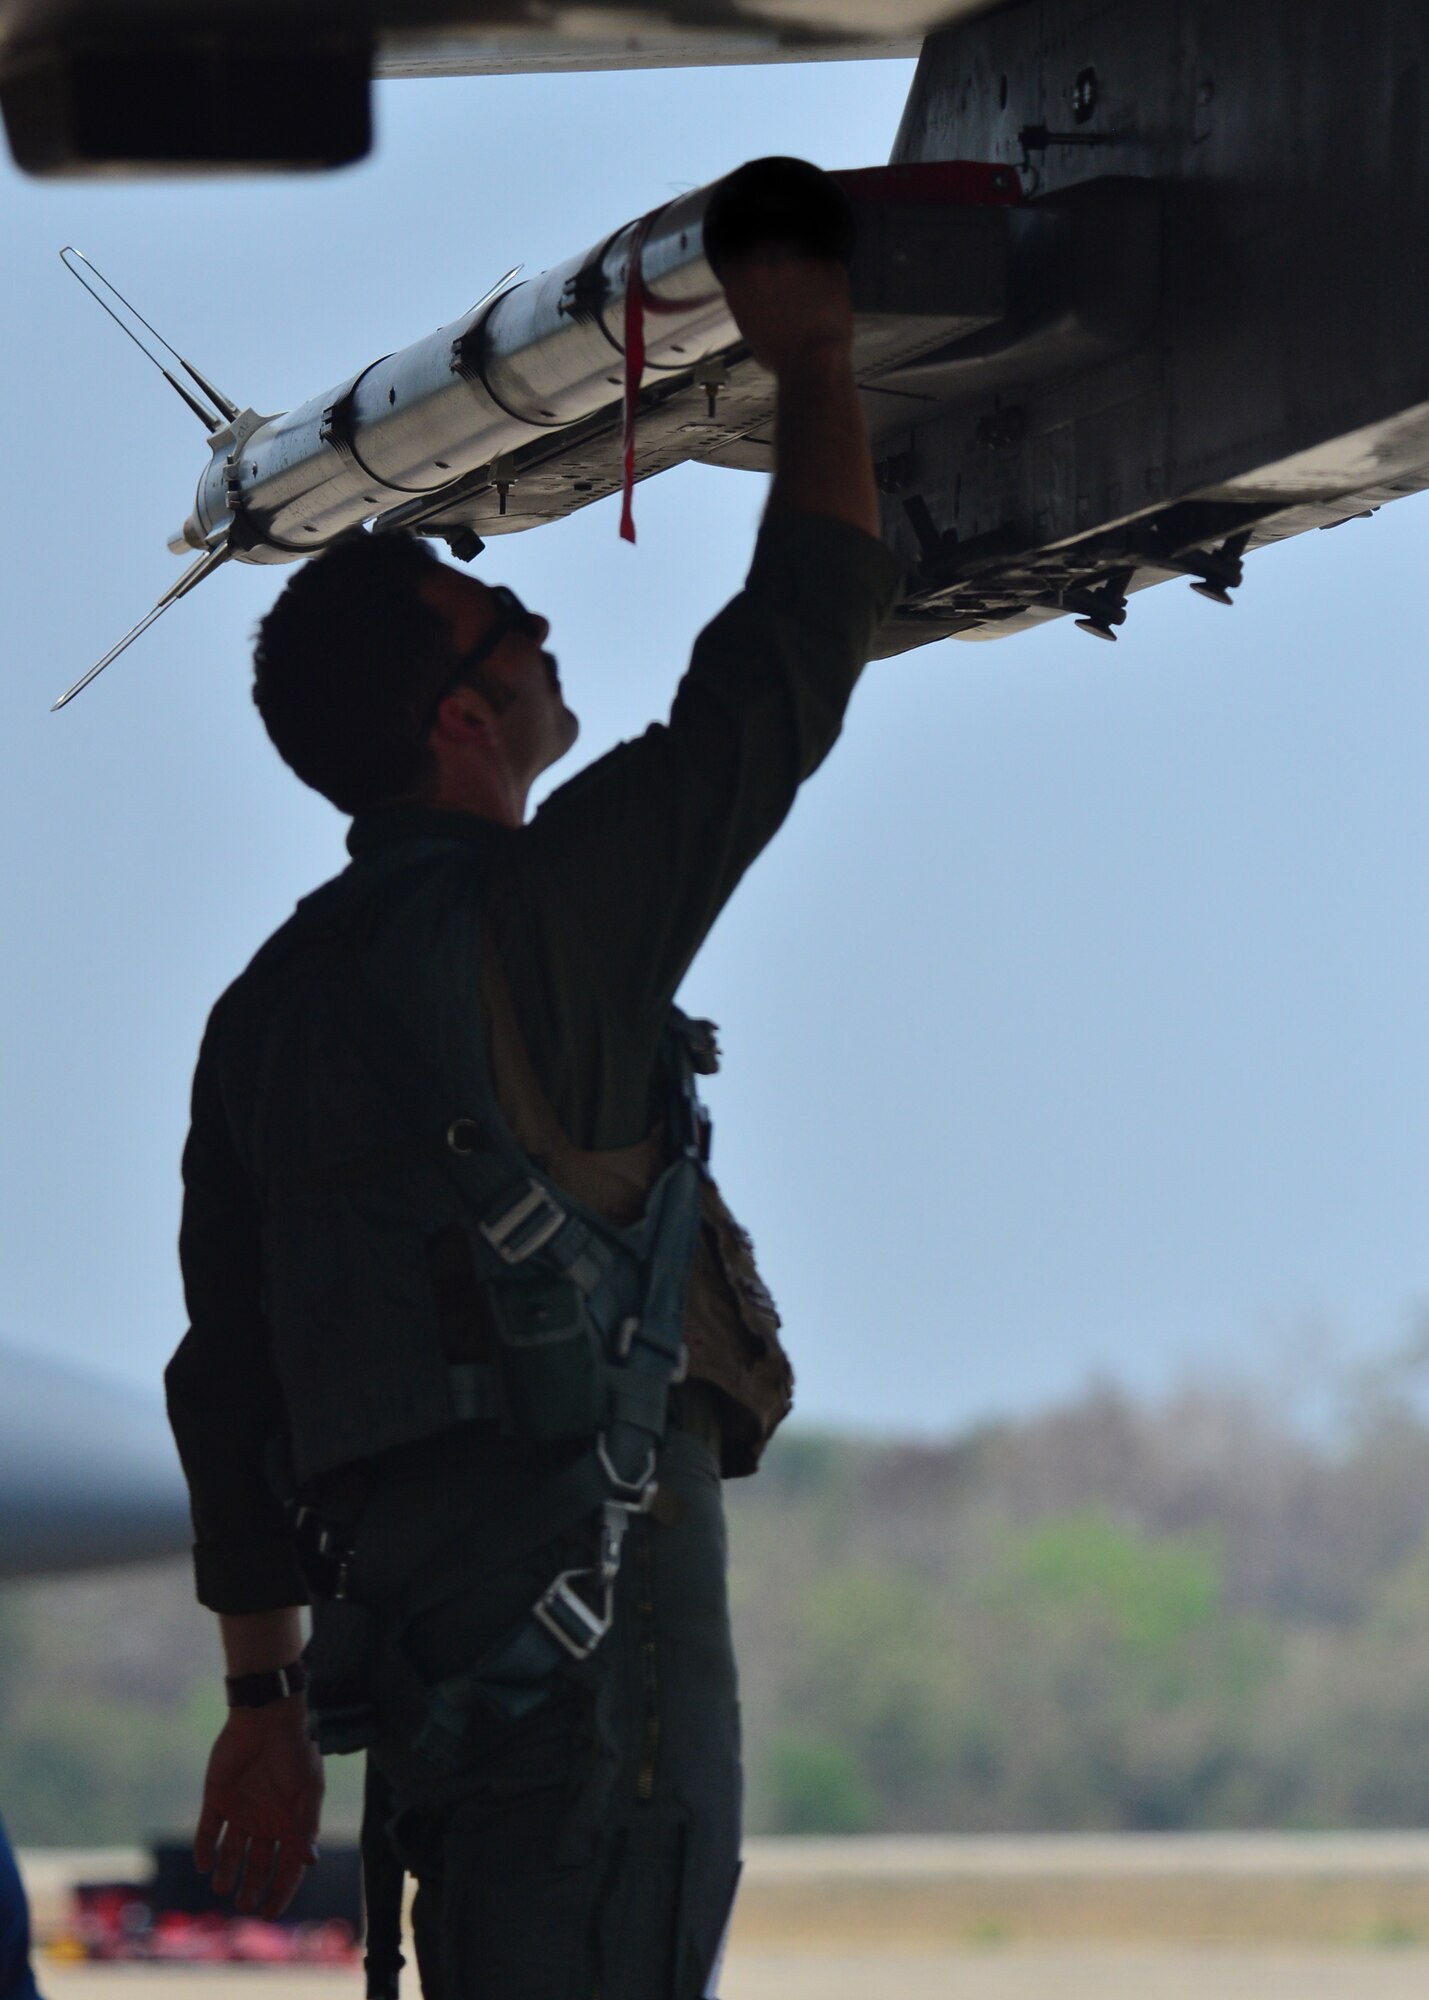 First Lt. Jordan Carr, a pilot for the 67th Fighter Squadron, Kadena Air Base Japan, conducts a preflight inspection of an F-15 Eagle during Exercise Cope Tiger 16, on Korat Royal Thai Air Force Base, Thailand, March 7, 2016. Exercise Cope Tiger 16 includes over 1,200 personnel from three countries and continues the growth of strong, interoperable and beneficial relationships within the Asia-Pacific Region, while demonstrating U.S. capability to project forces strategically in a combined, joint environment. (U.S. Air Force Photo by Tech Sgt. Aaron Oelrich/Released)